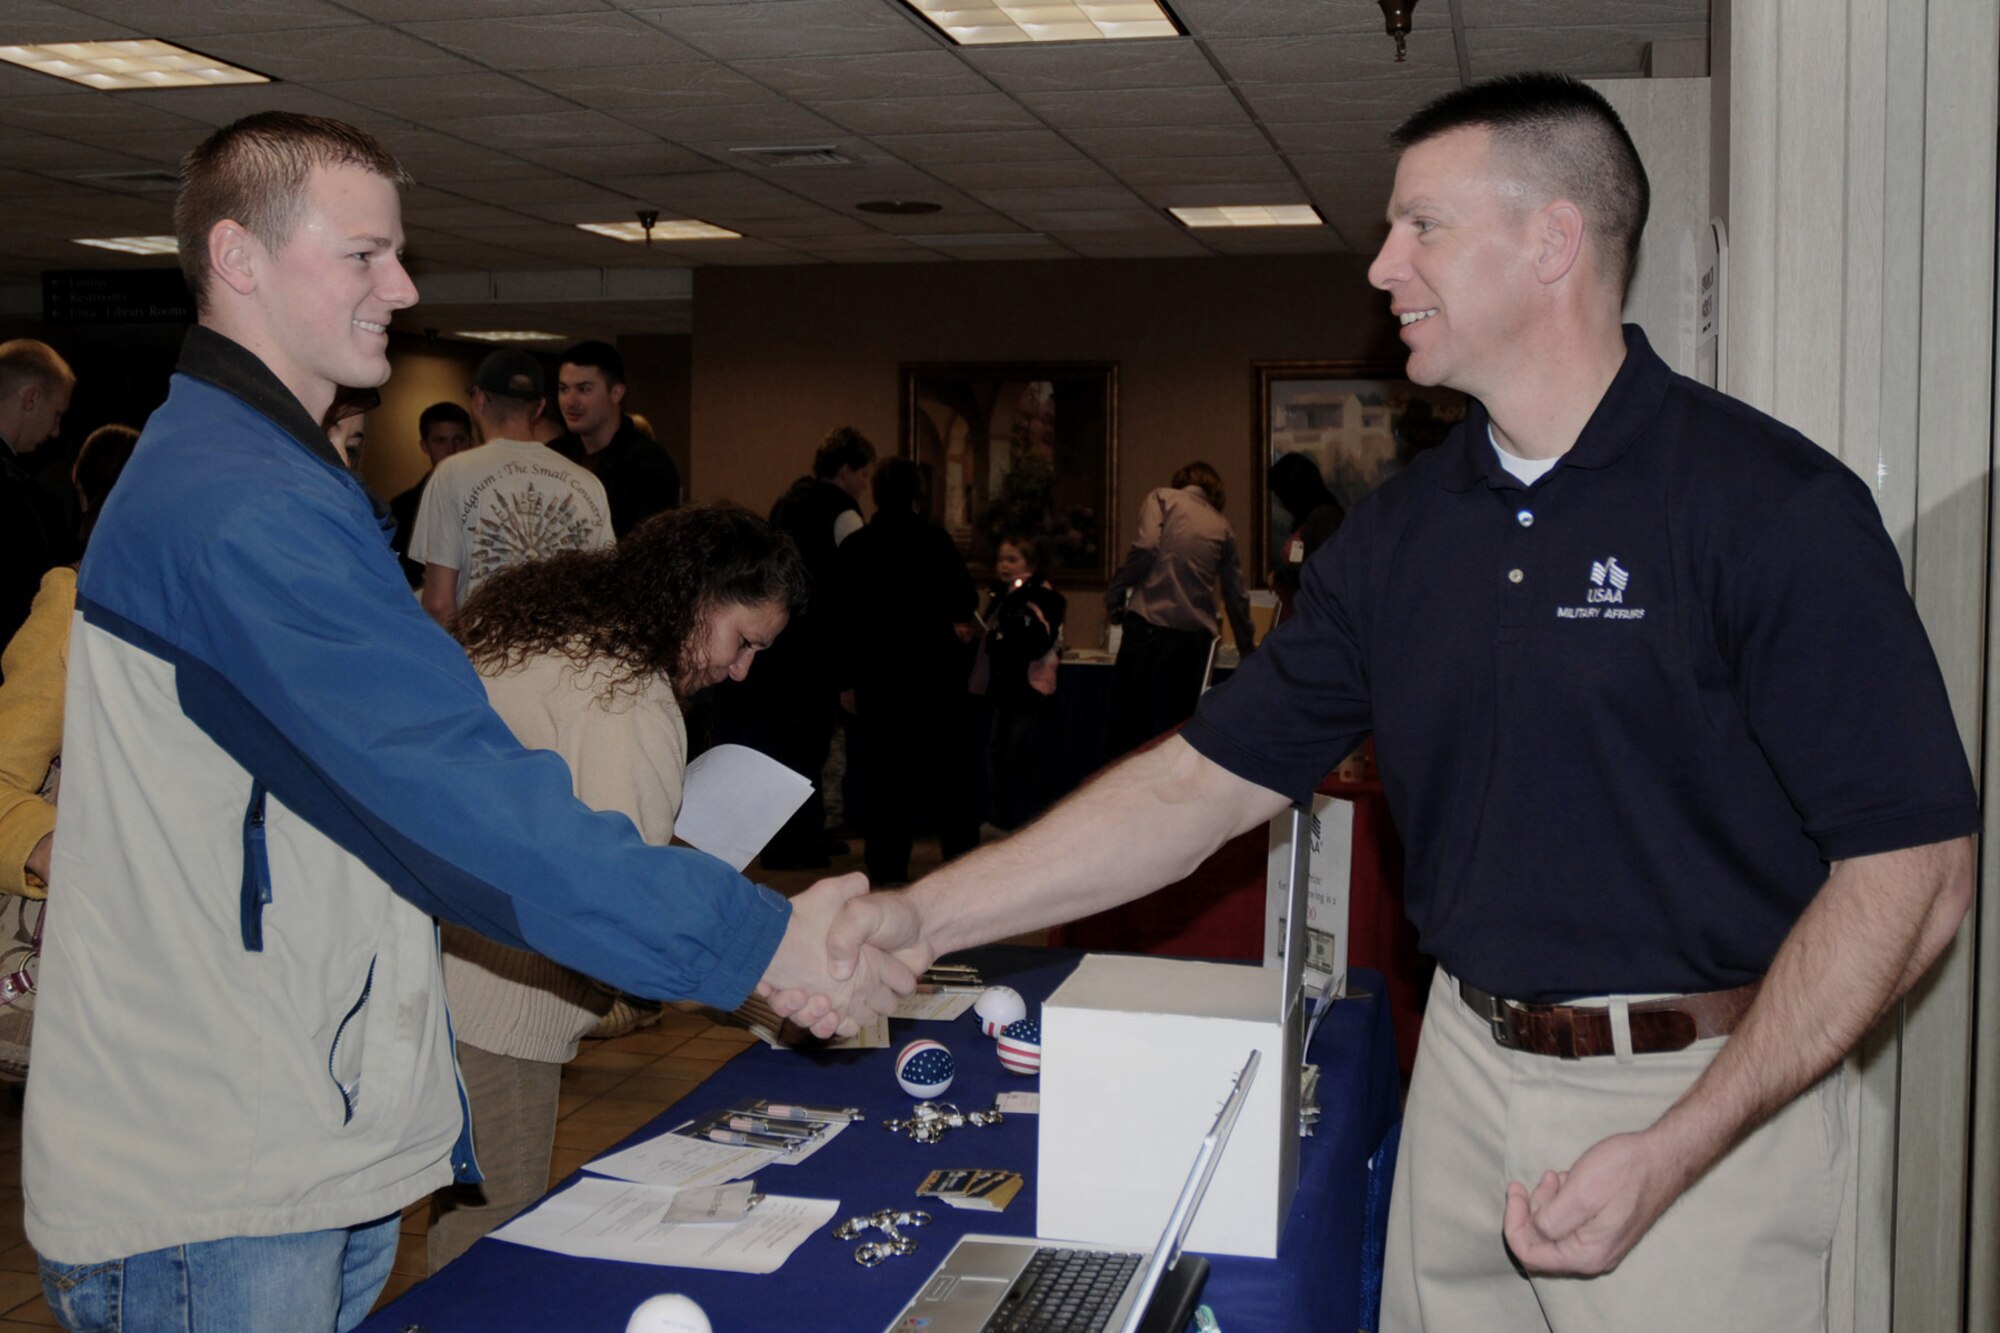 Staff Sgt. Joshua Brady (left) receives a coin from USAA Military Affairs Representative Michael Evans (right) at the Yellow Ribbon Event held at the Holiday Inn Airport in Des Moines, Iowa on March 6, 2010.  The coin is being presented to Sgt. Brady as a ?thank you? for his service and time spent overseas on a recent deployment.  (US Air Force photo/Staff Sgt. Linda E. Kephart)(Released)        